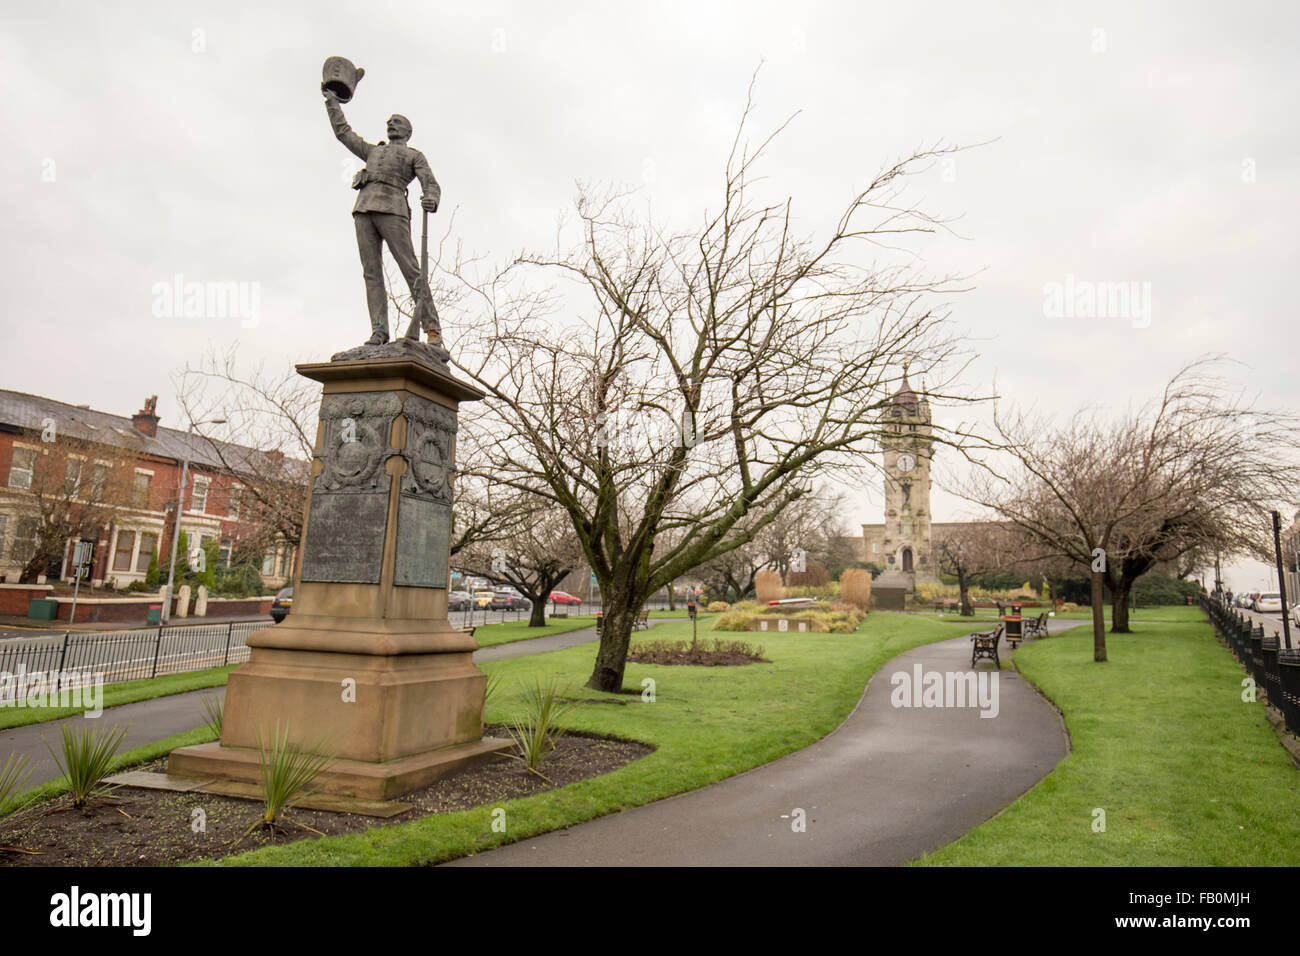 The Lancashire Fusiliers War Memorial, Tower Gardens, Bury, Greater Manchester, England Stock Photo